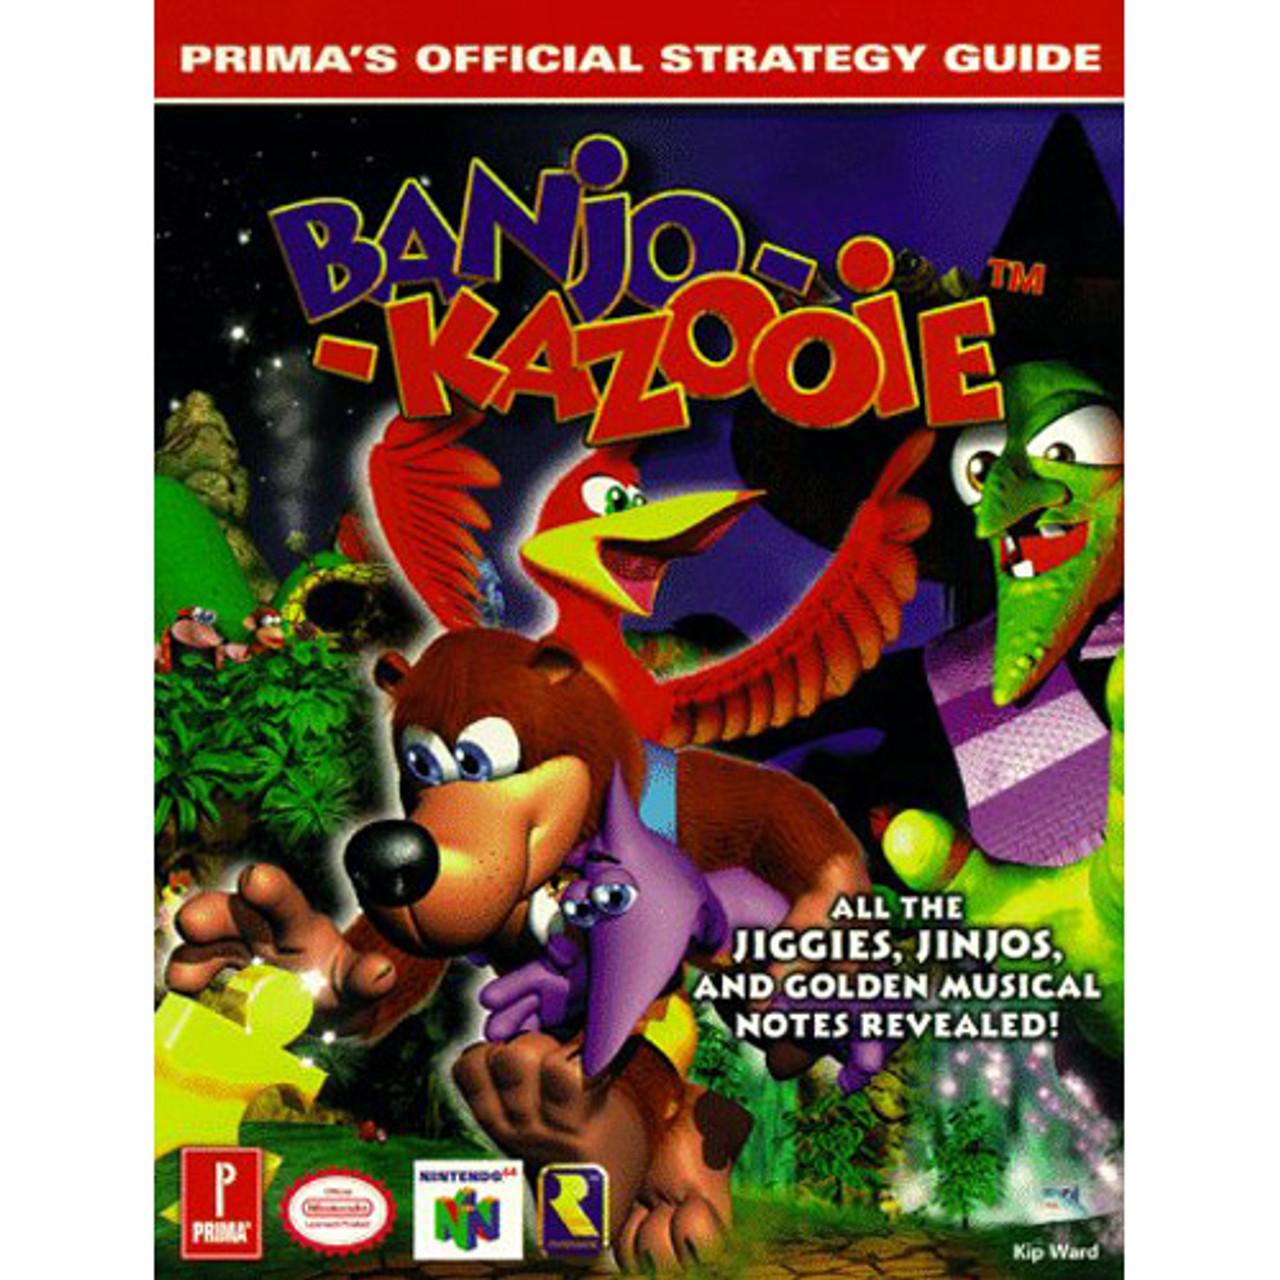 Banjo-Kazooie Offical Player's Guide by Nintendo